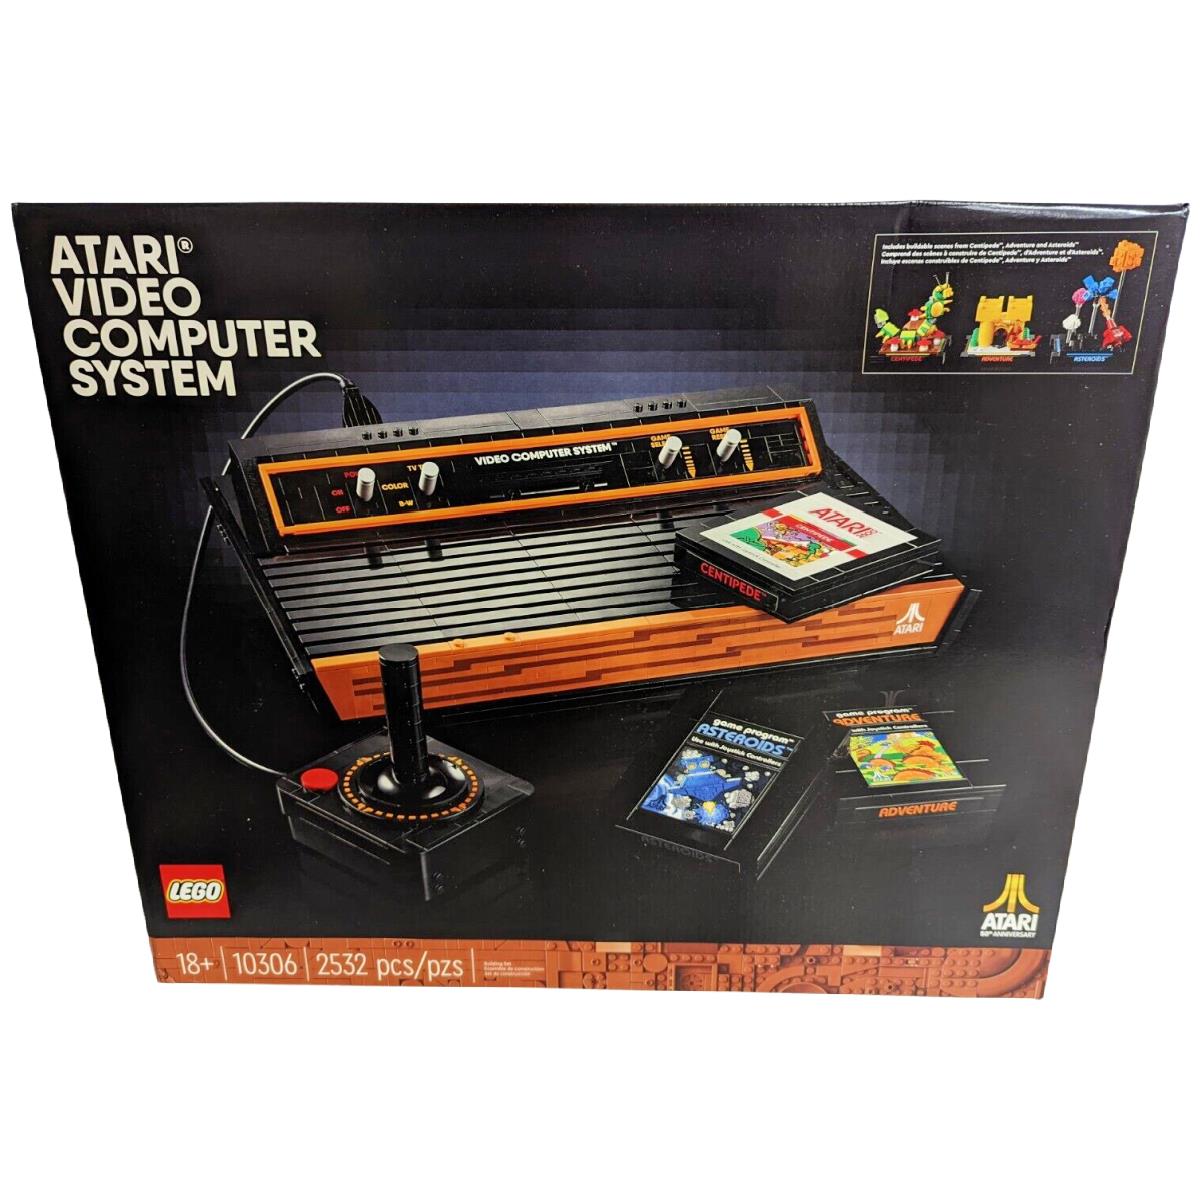 Lego 10306 Icons Atari 2600 Video Computer System Game 2532 Pieces Box